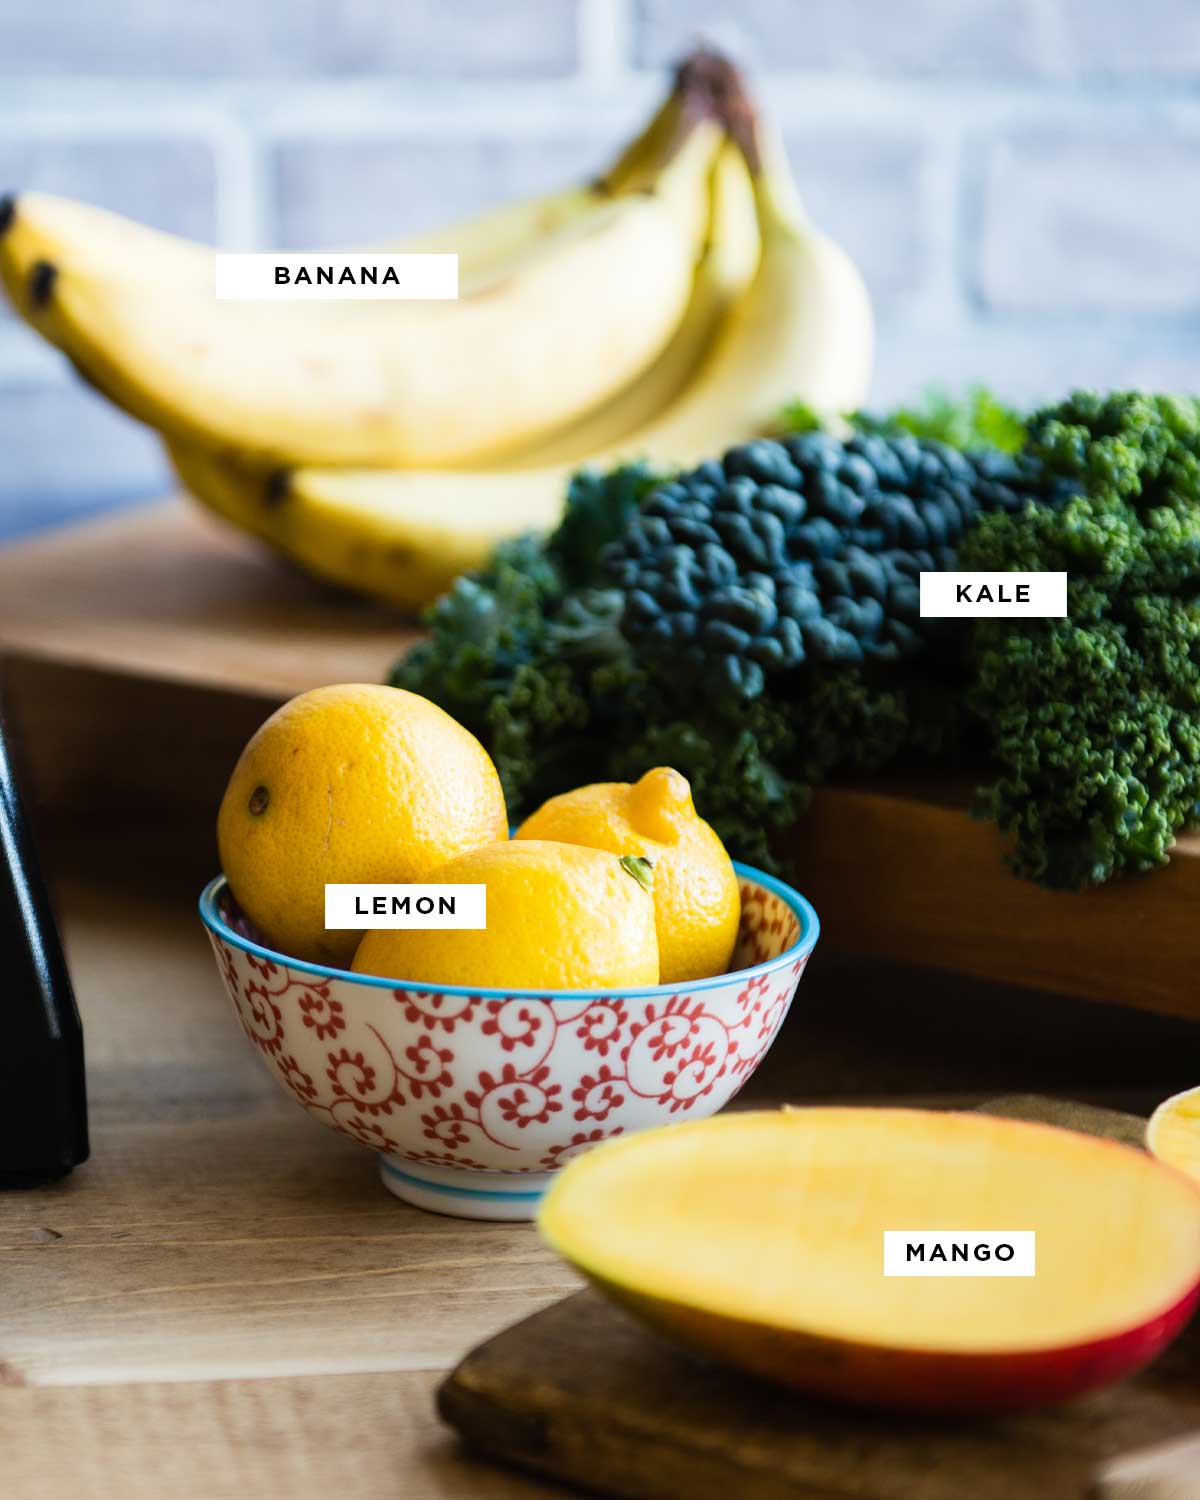 ingredients for a citrus smoothie recipe including bananas, kale, lemons and mango